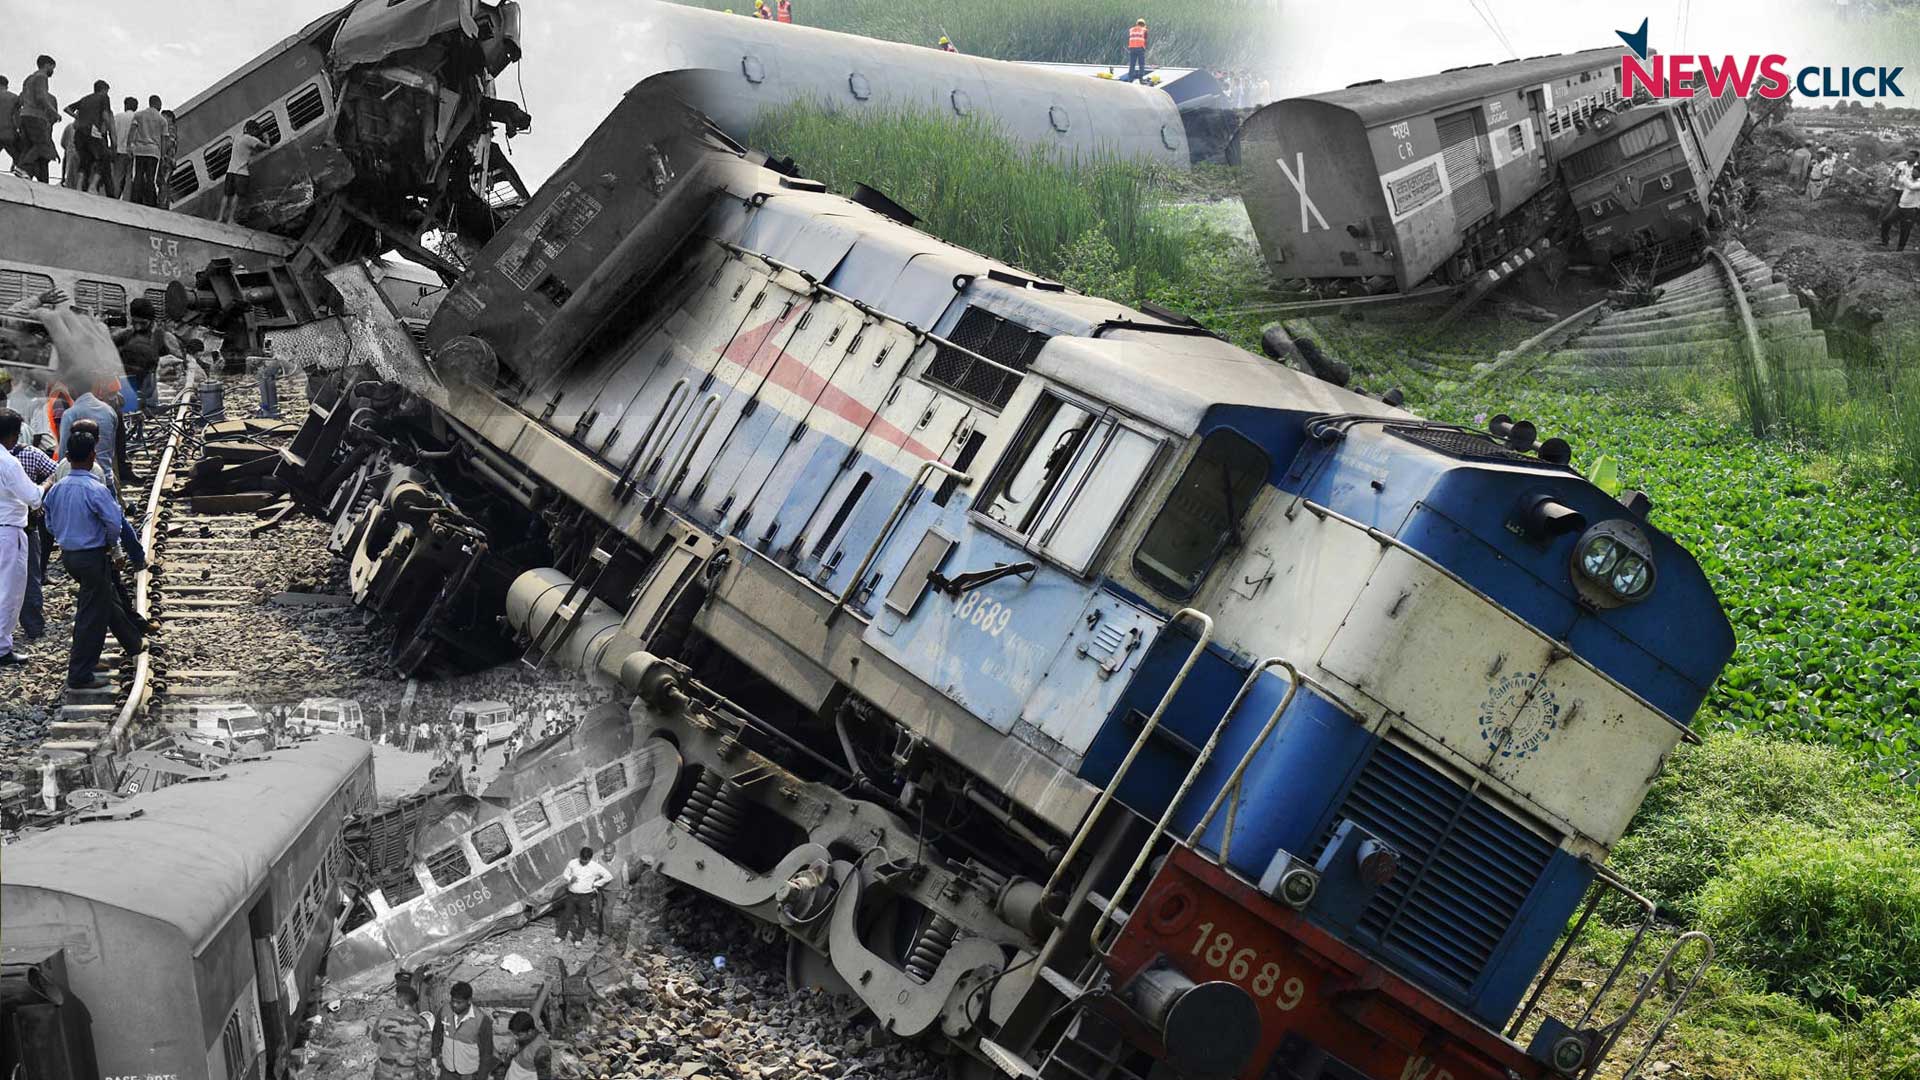 Deaths In India Due To Train Derailments In 2016 17 The Highest In More